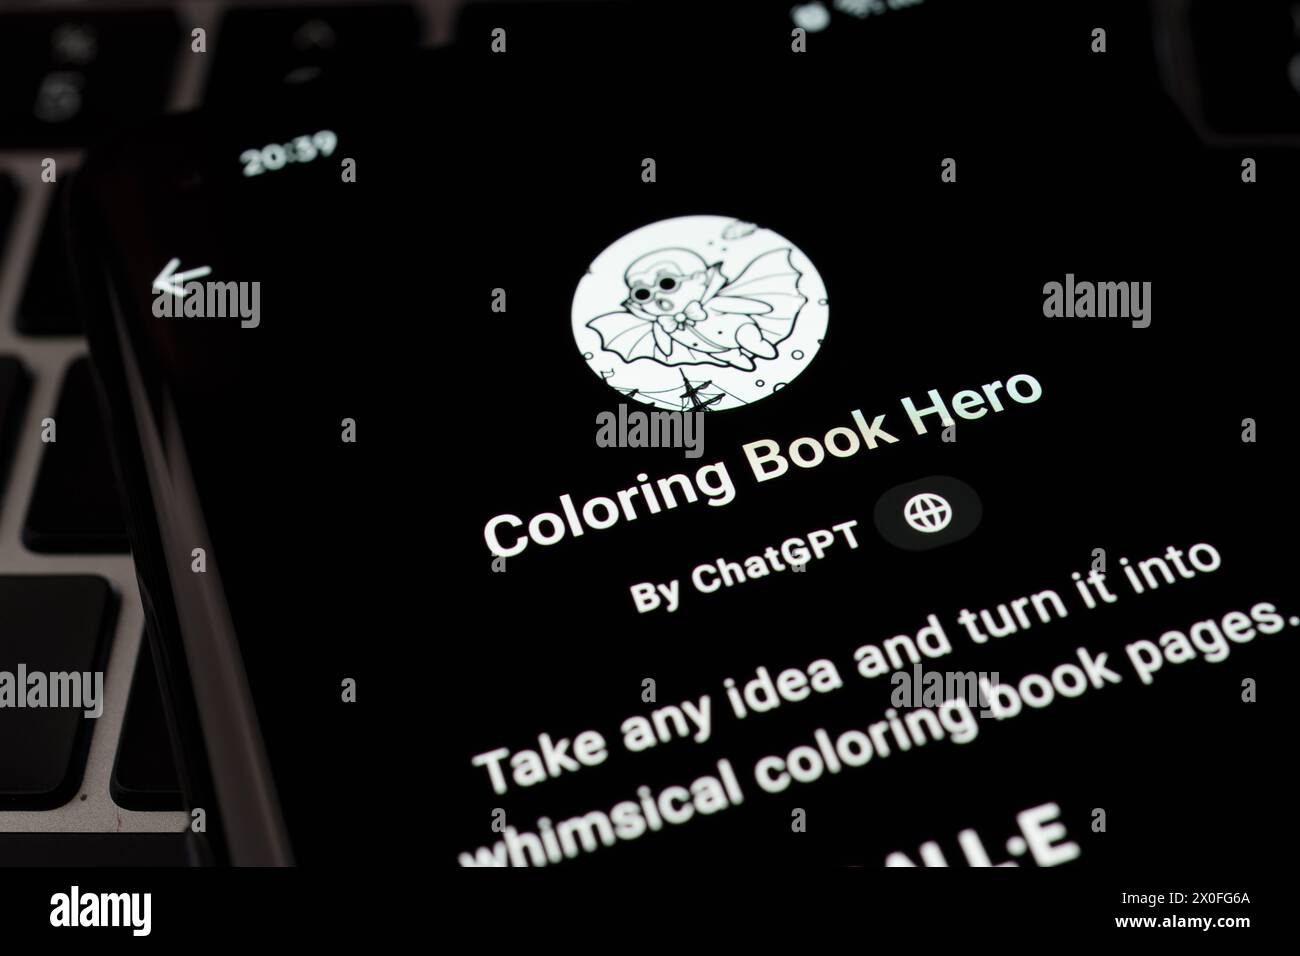 COLORING BOOK HERO custom GPT seen in GPT Store on the screen of smartphone placed on laptop keyboad. Stafford, United Kingdom, April 8, 2024 Stock Photo